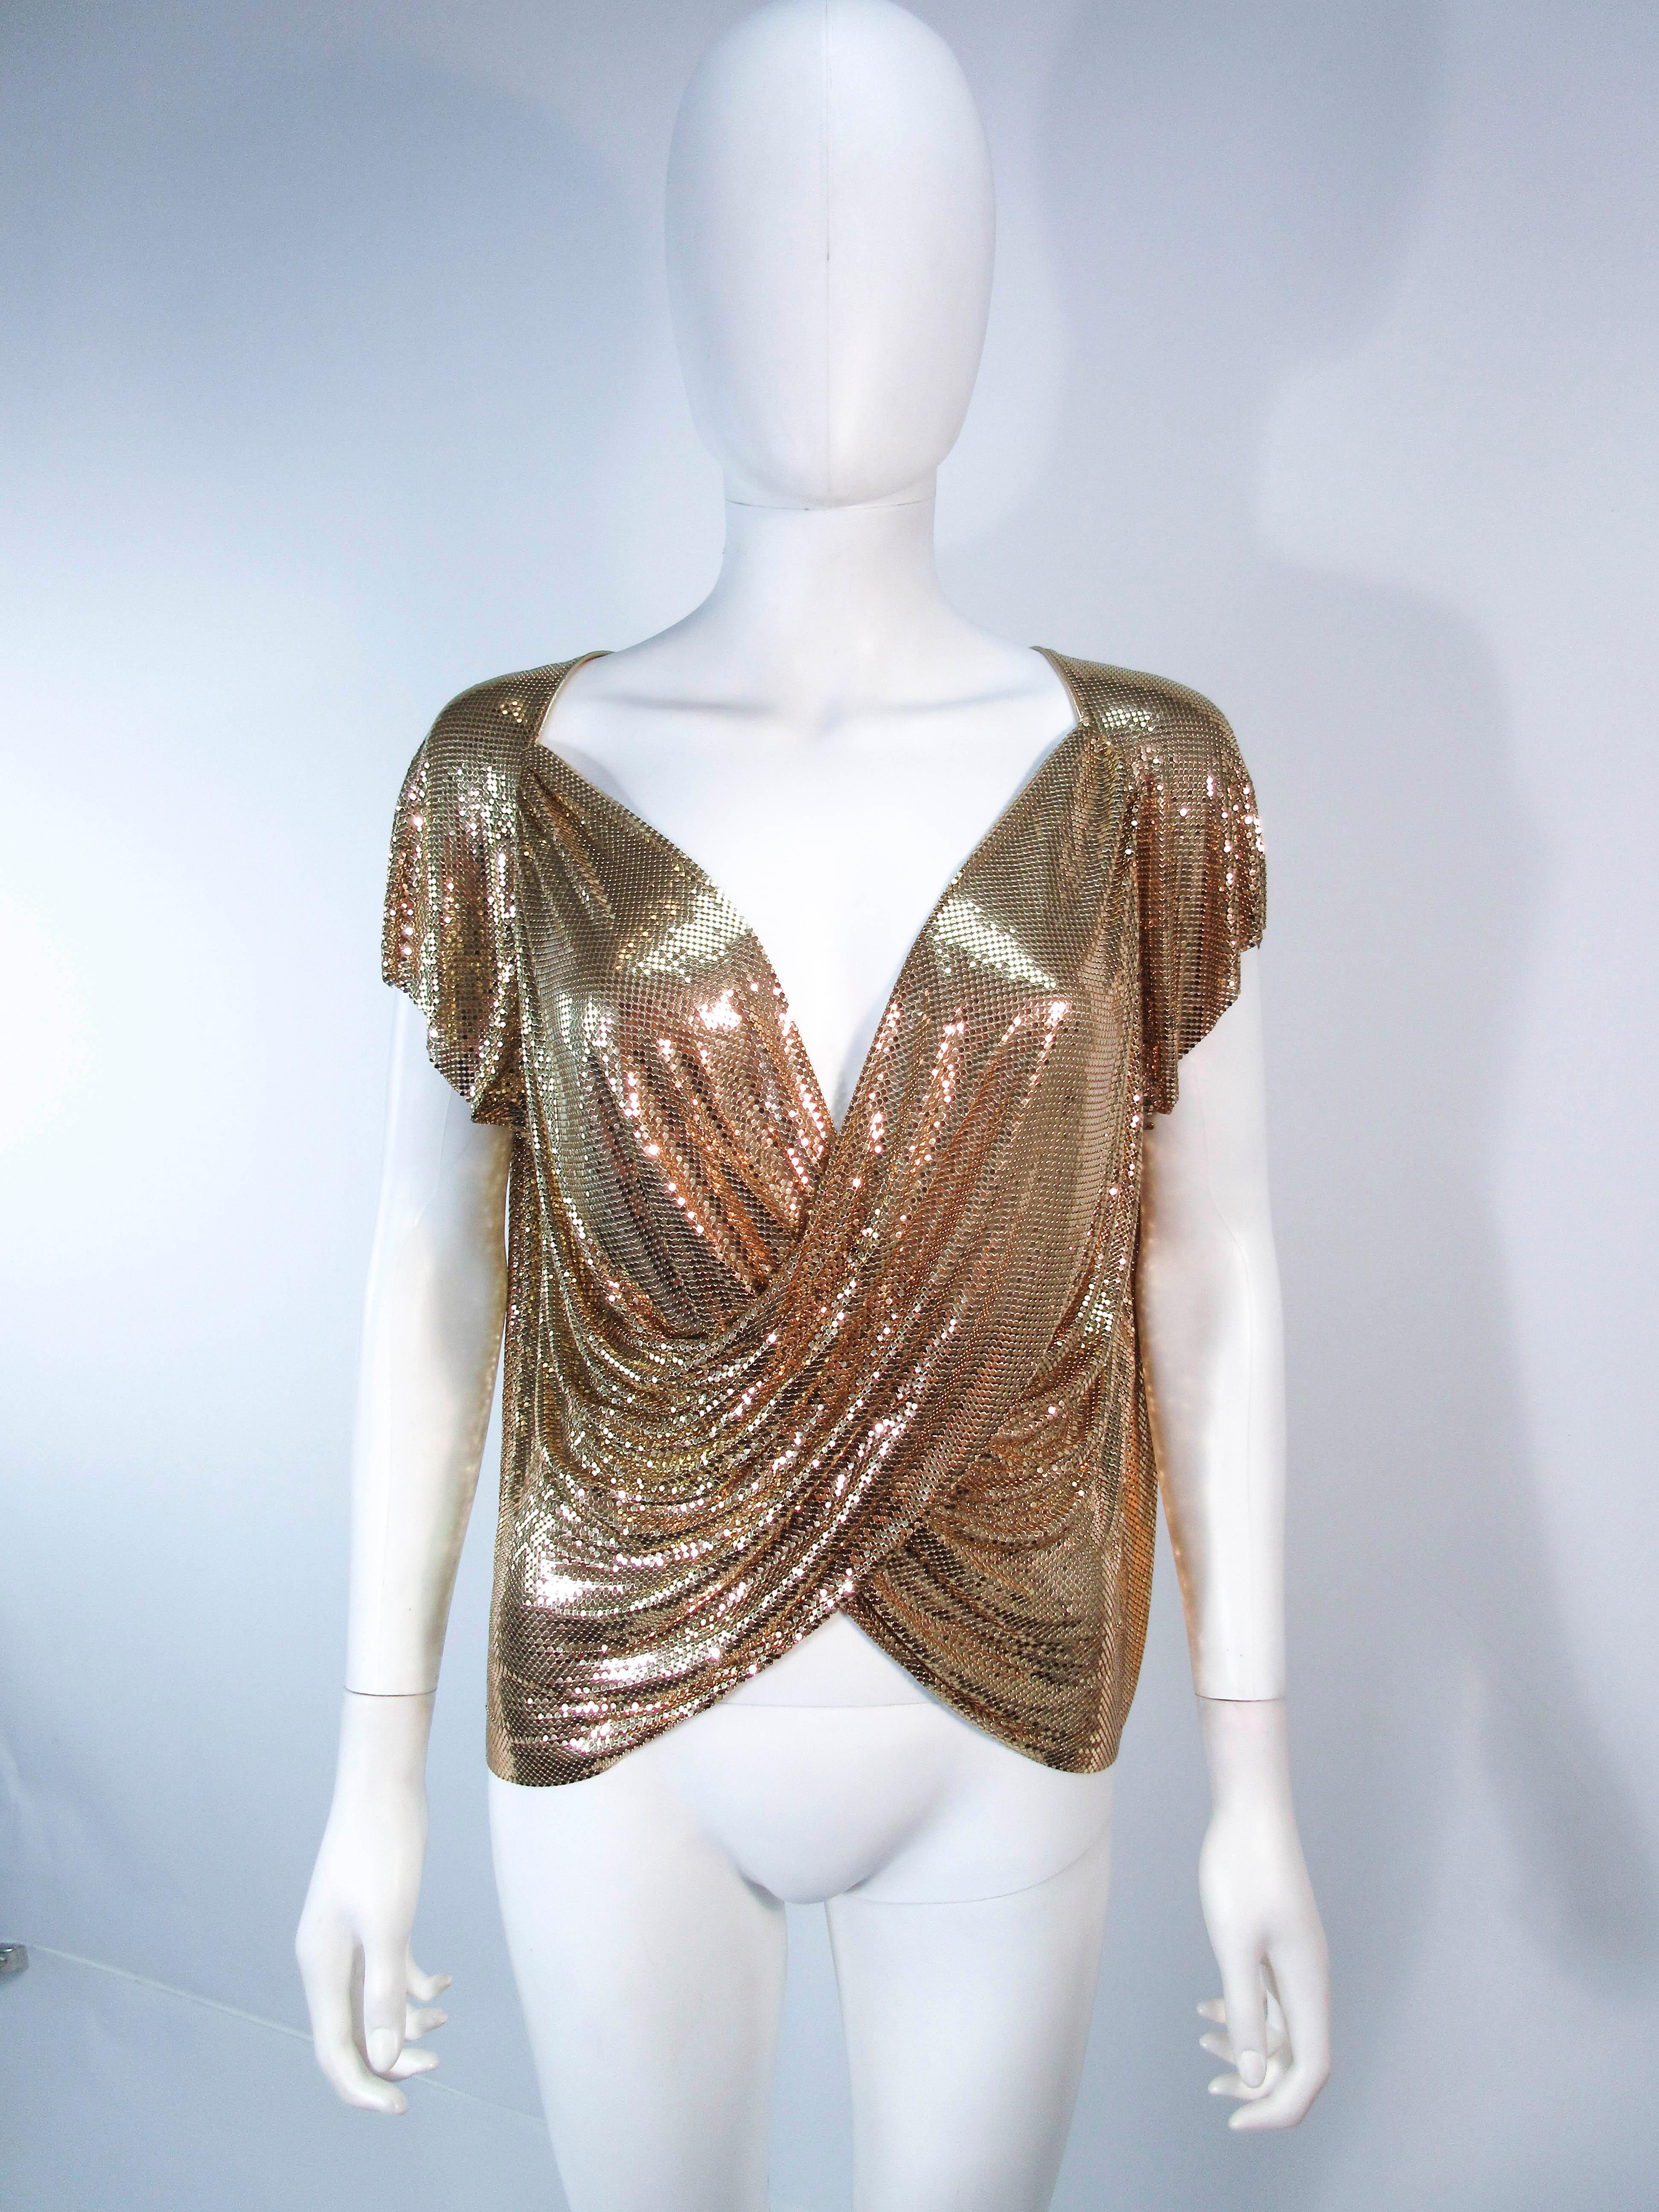 This Whiting and Davis design is composed of a gold mesh. This item can be fashioned as a draped in either direction. Features a side zipper closure. In excellent vintage condition.

**Please cross-reference measurements for personal accuracy. Size